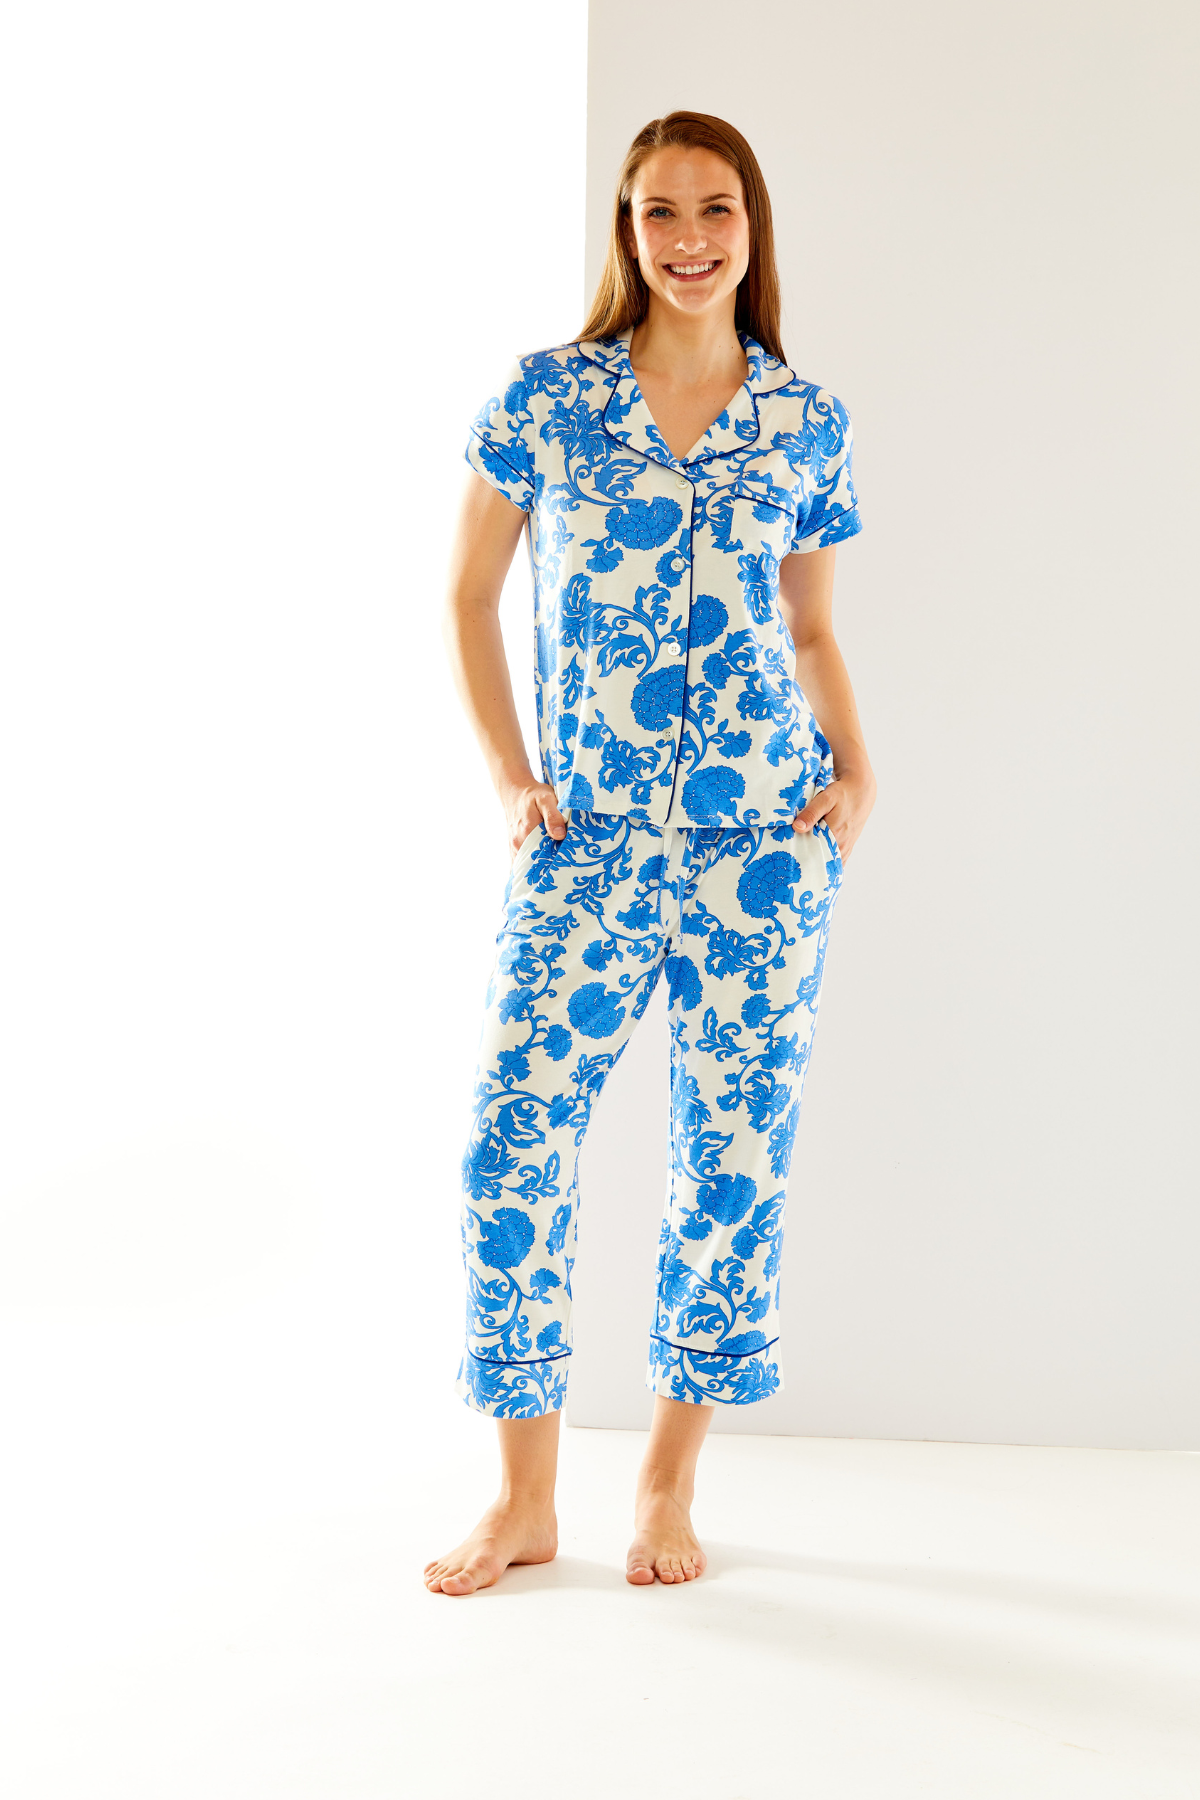 Woman in blue and white pajamas